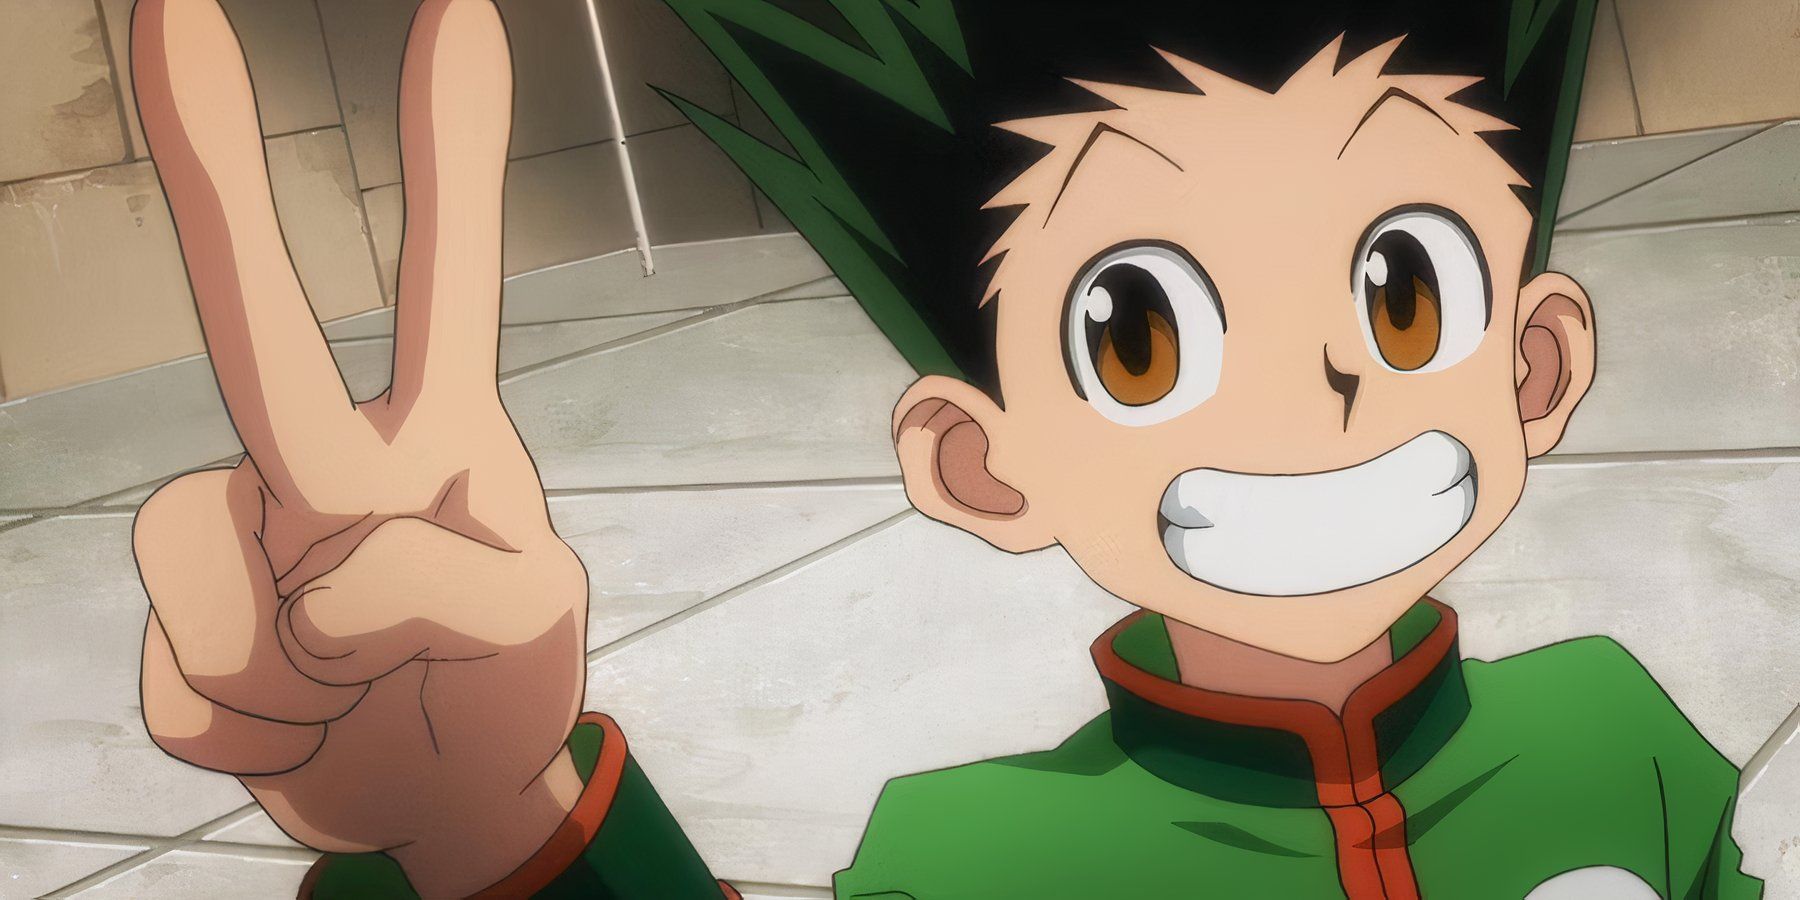 Gon Freecss smiles after winning a fight during the Hunter Exam in Hunter X Hunter.